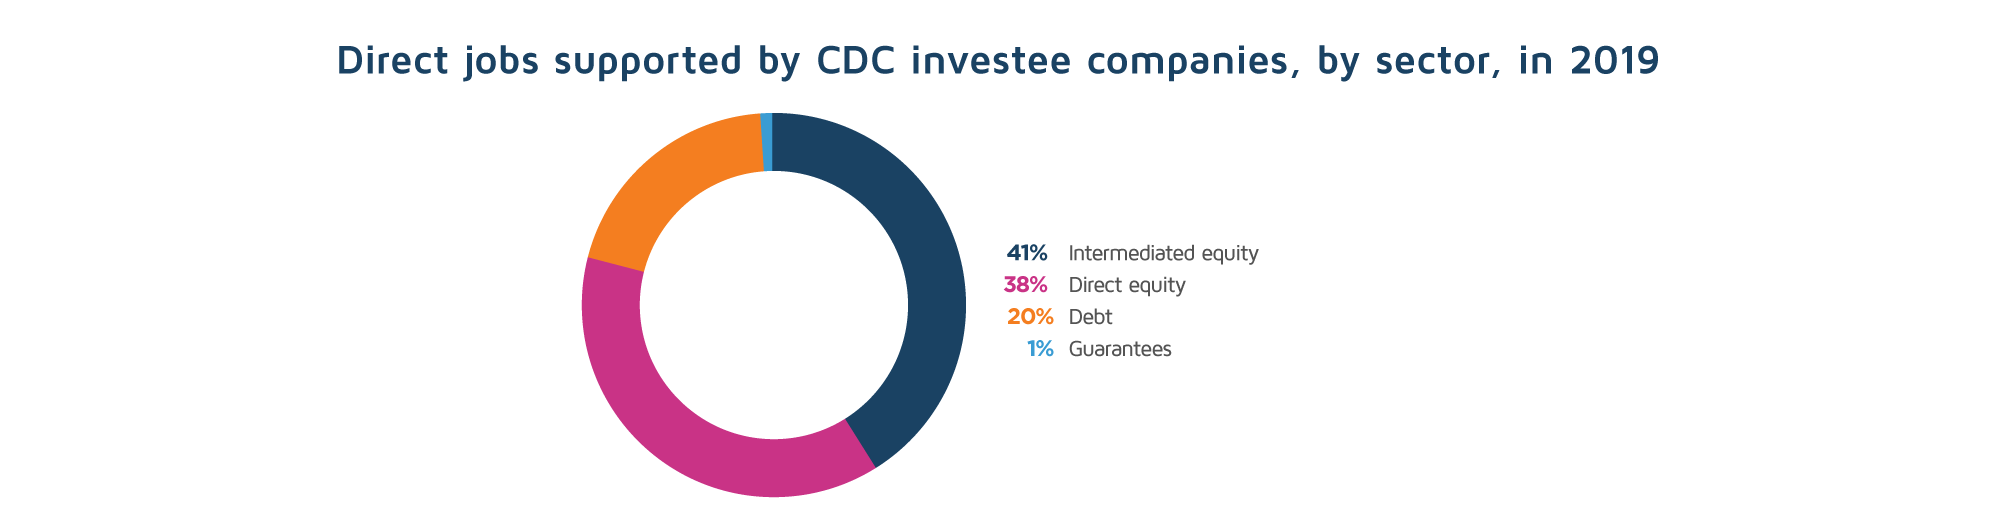 Direct jobs supported by CDC investee companies, by sector, in 2019